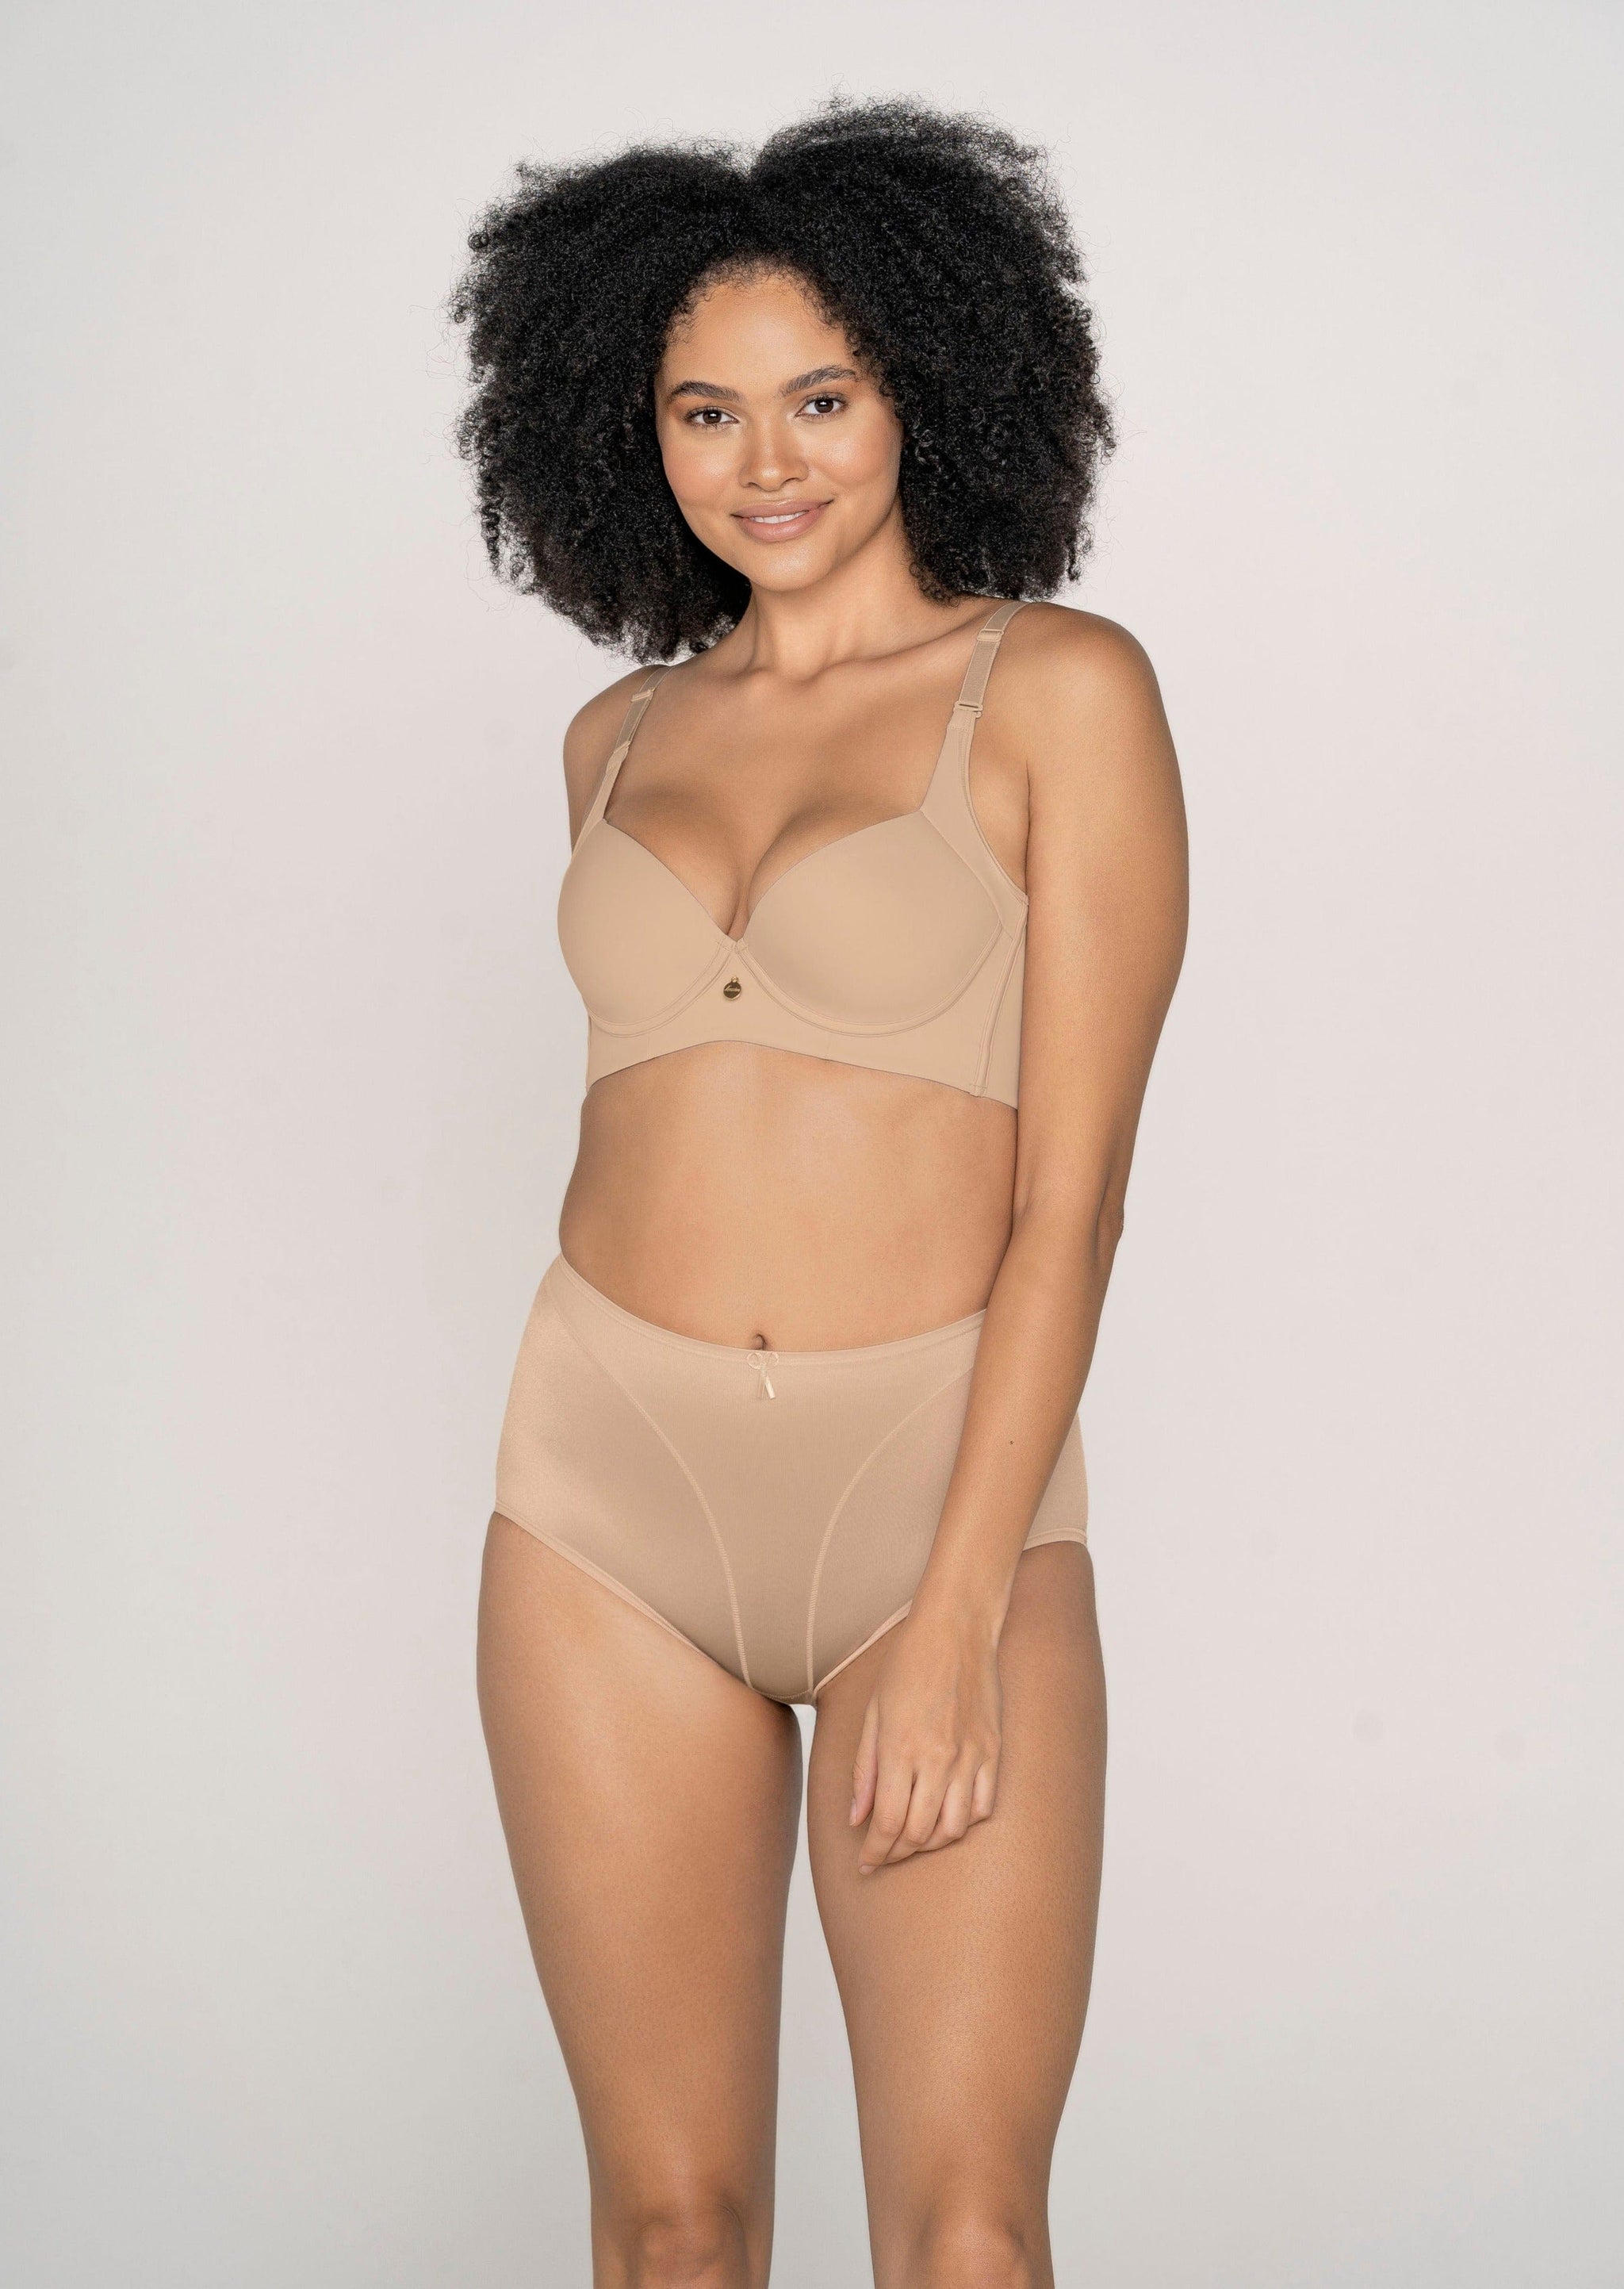 Buy SMOOTH PLUNGE SOFT CUP BRA online at Intimo